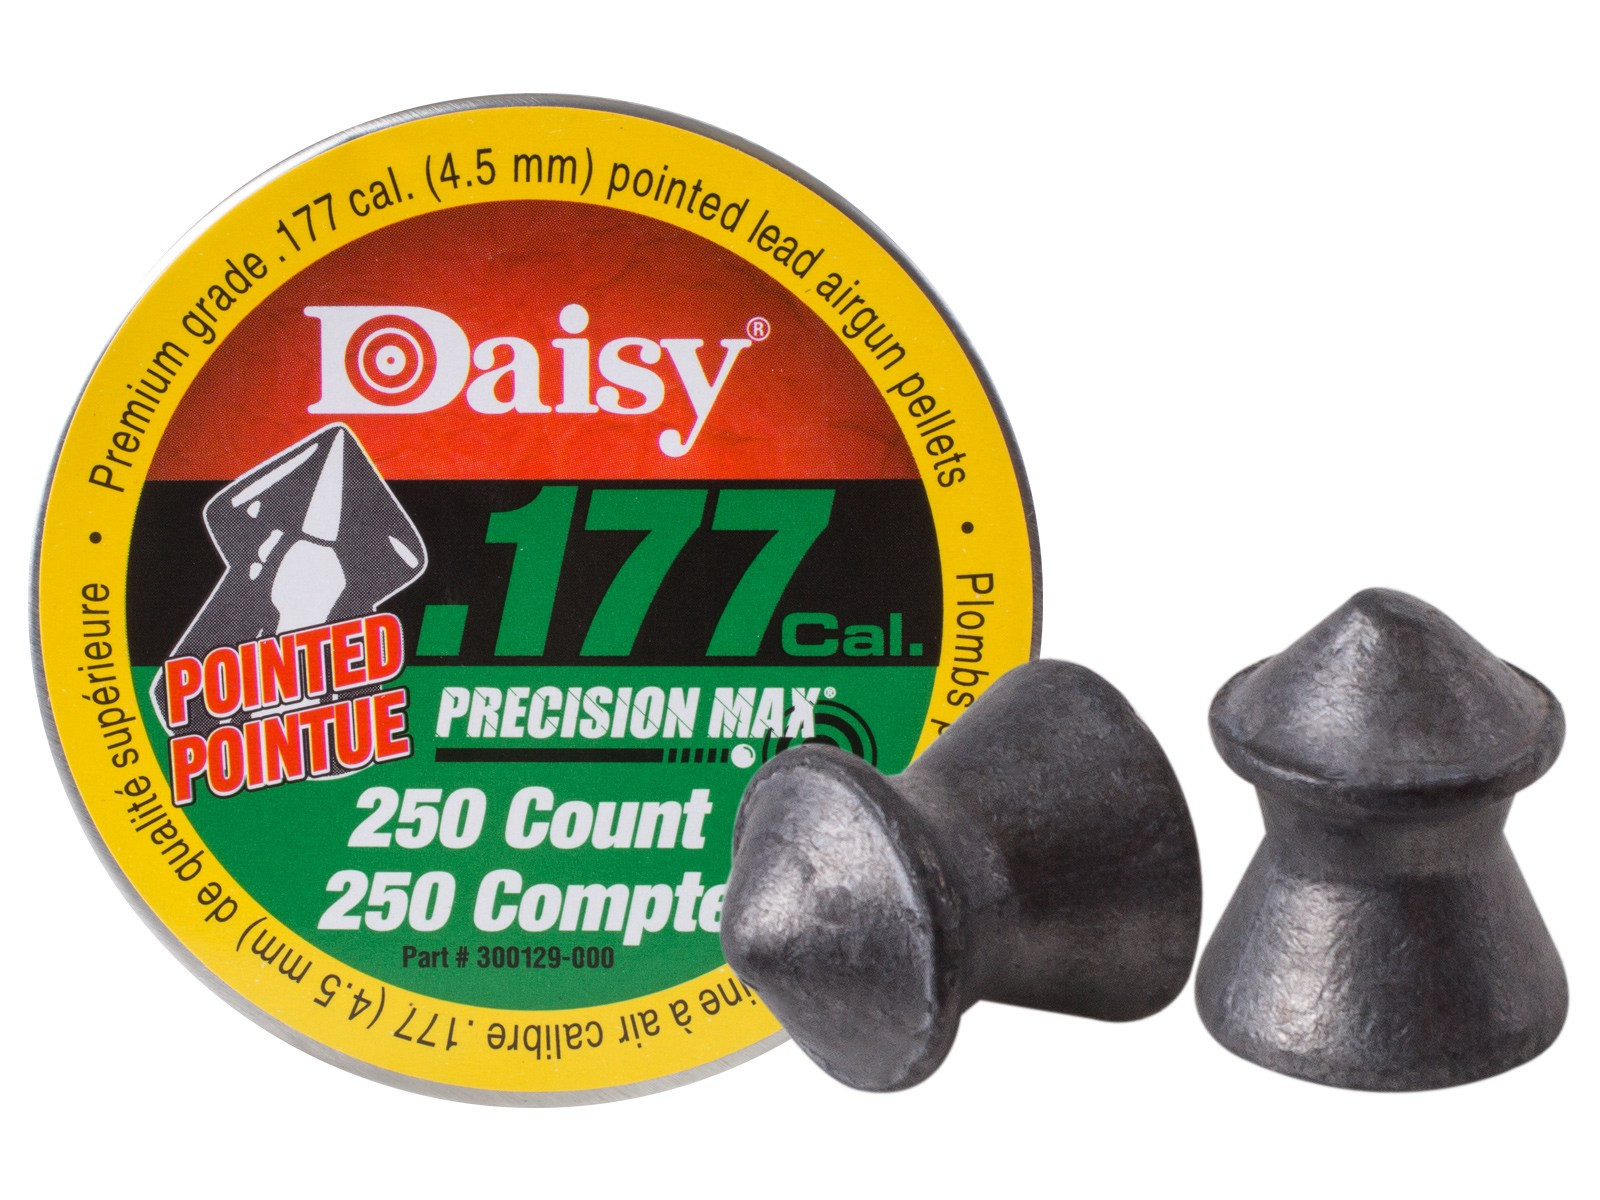 2pc DAISY .177CAL FLAT NOSE LEAD PELLETS 250 Count BELT PACK #257 500 Total NEW 